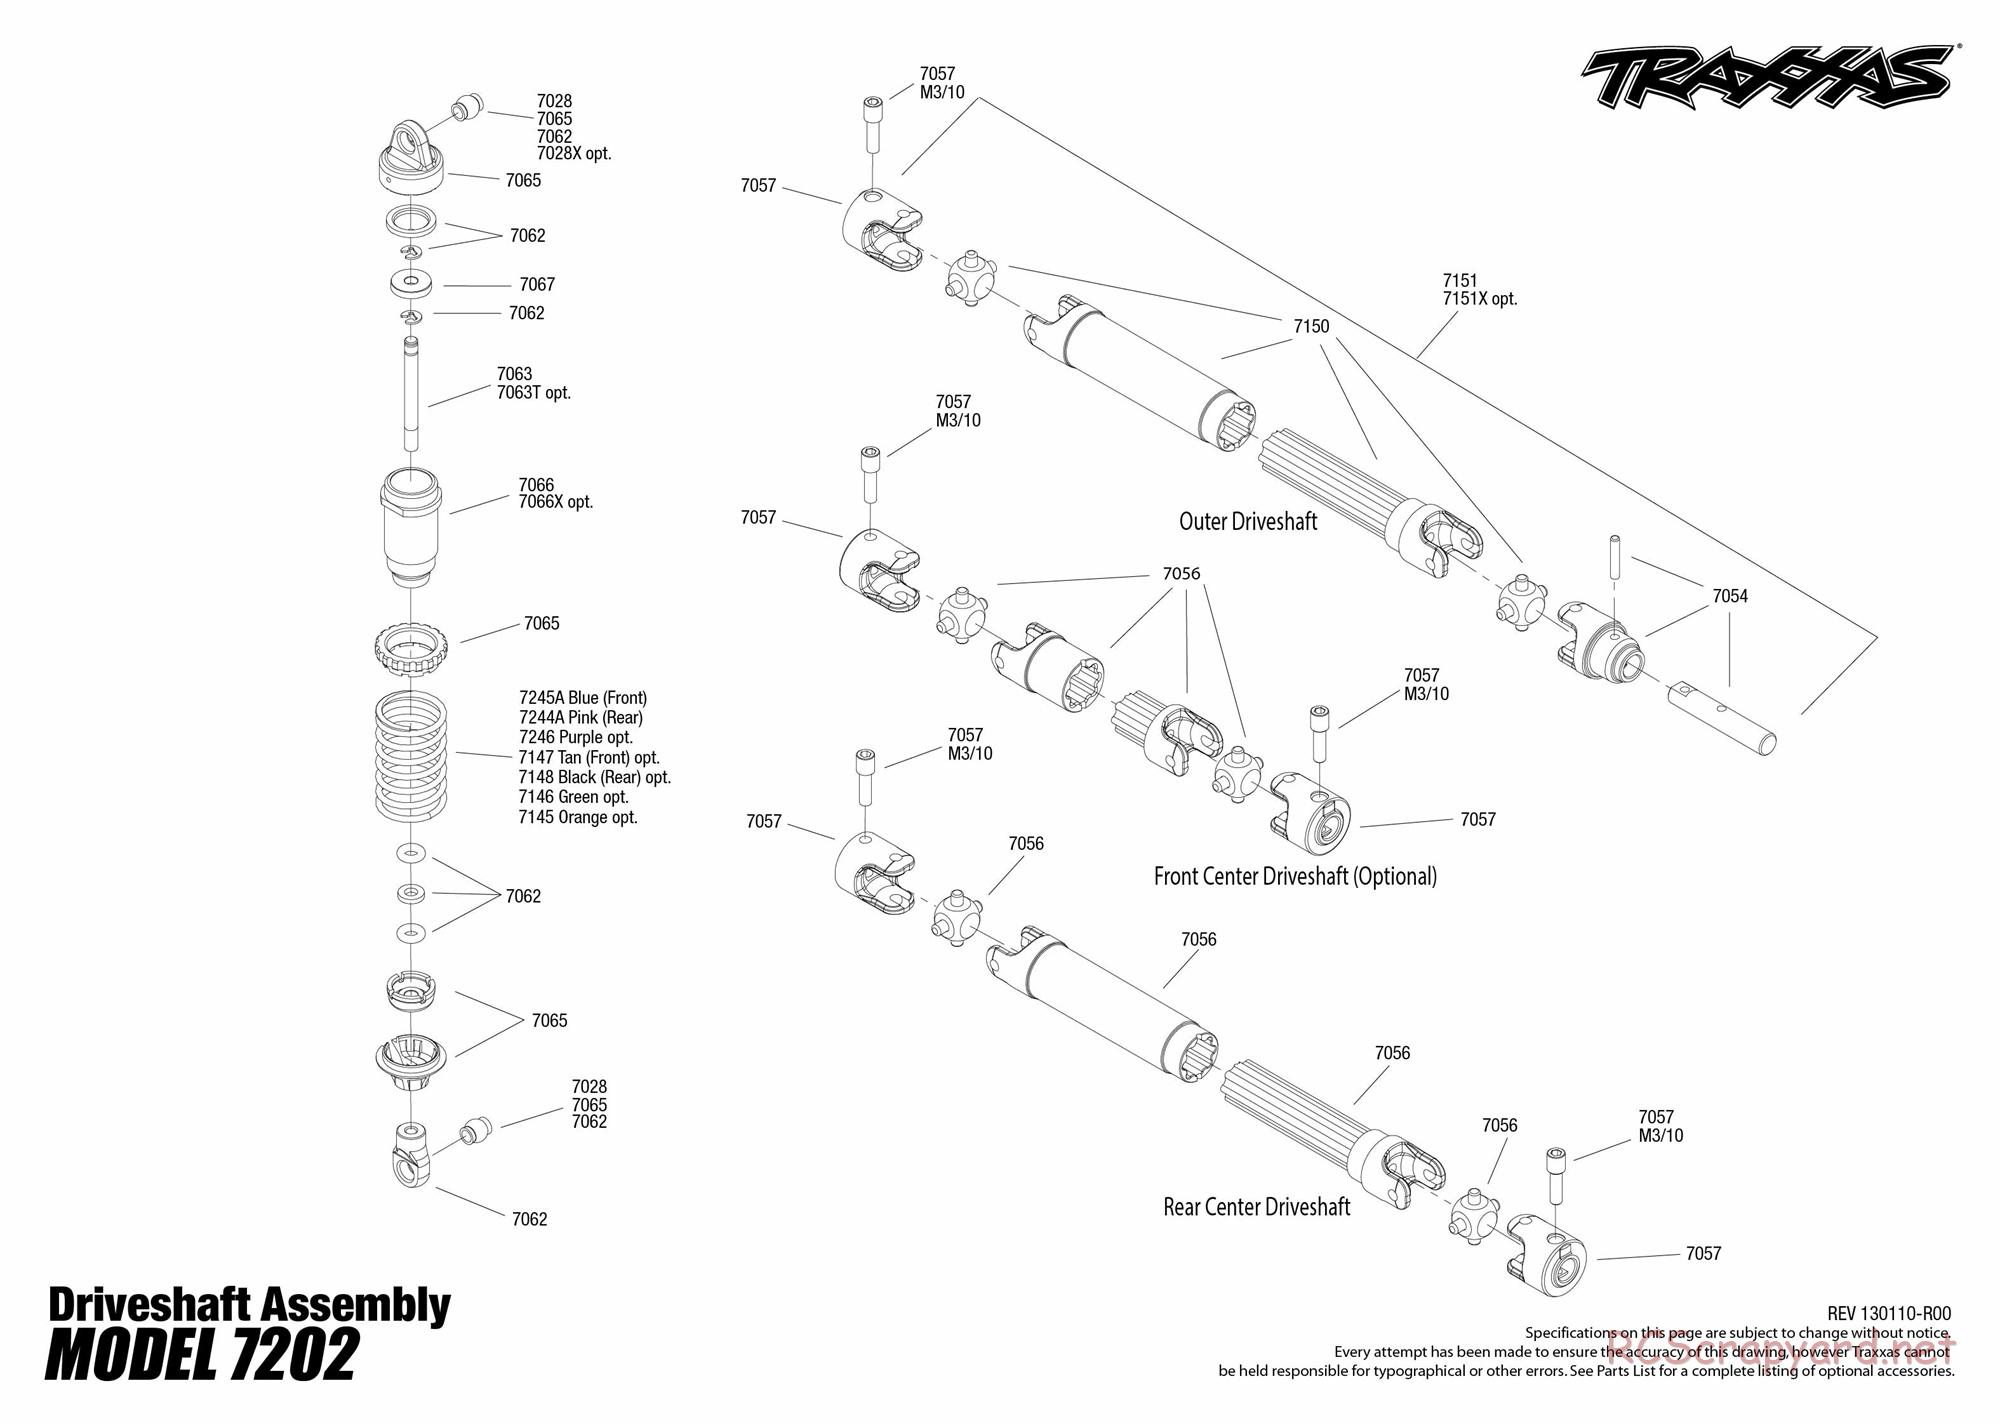 Traxxas - 1/16 Grave Digger (2013) - Exploded Views - Page 2